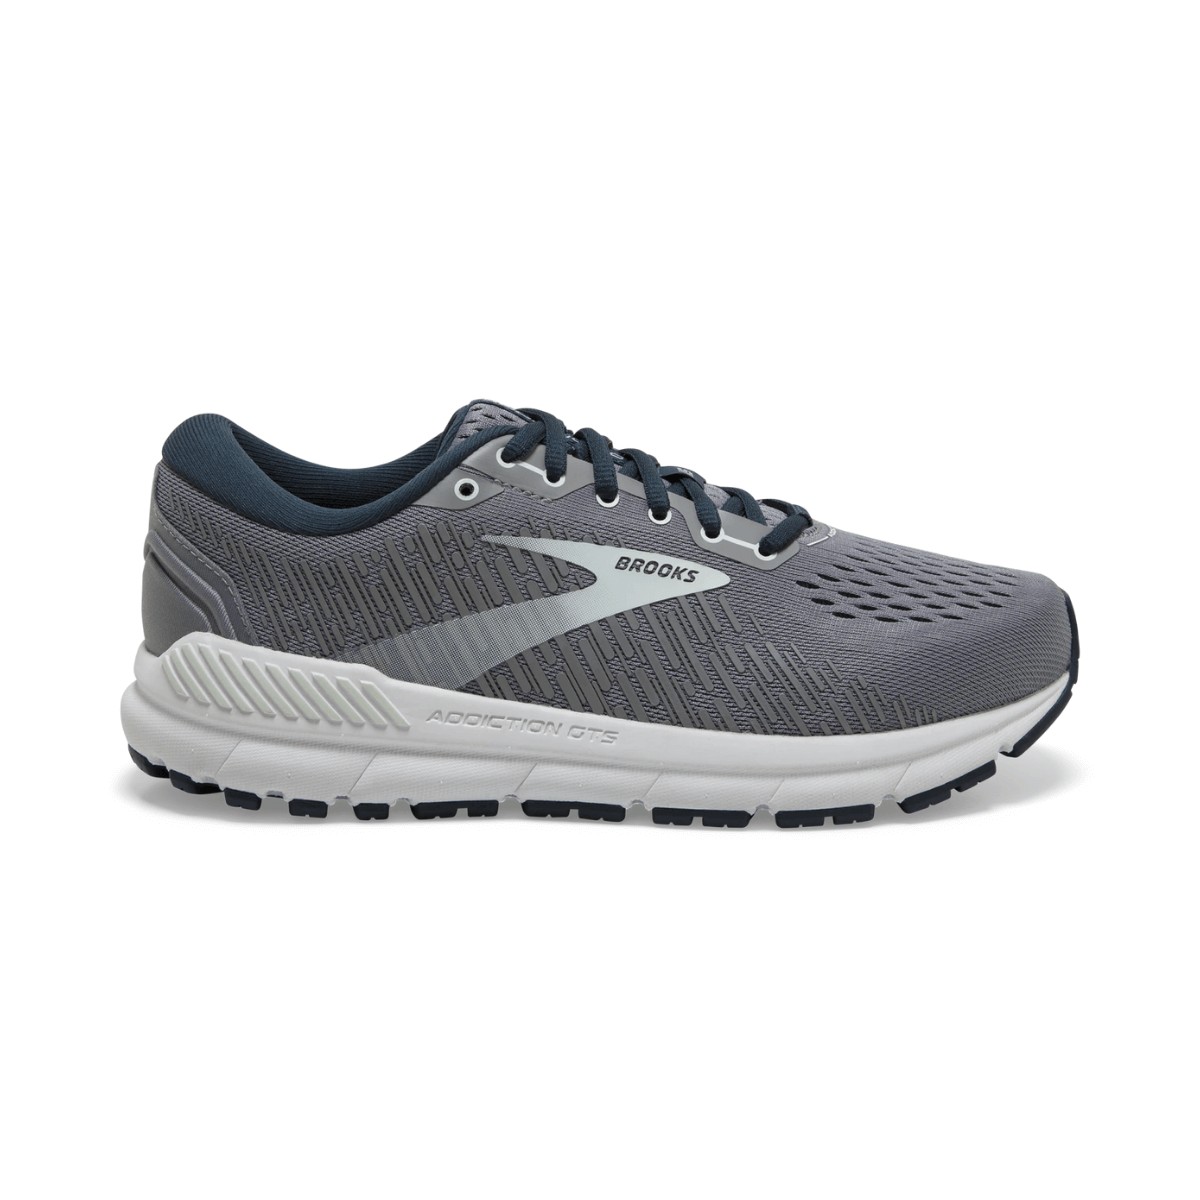 Chaussures Brooks Addiction GTS 15 Gris SS22 Femme, Taille 40,5 - EUR